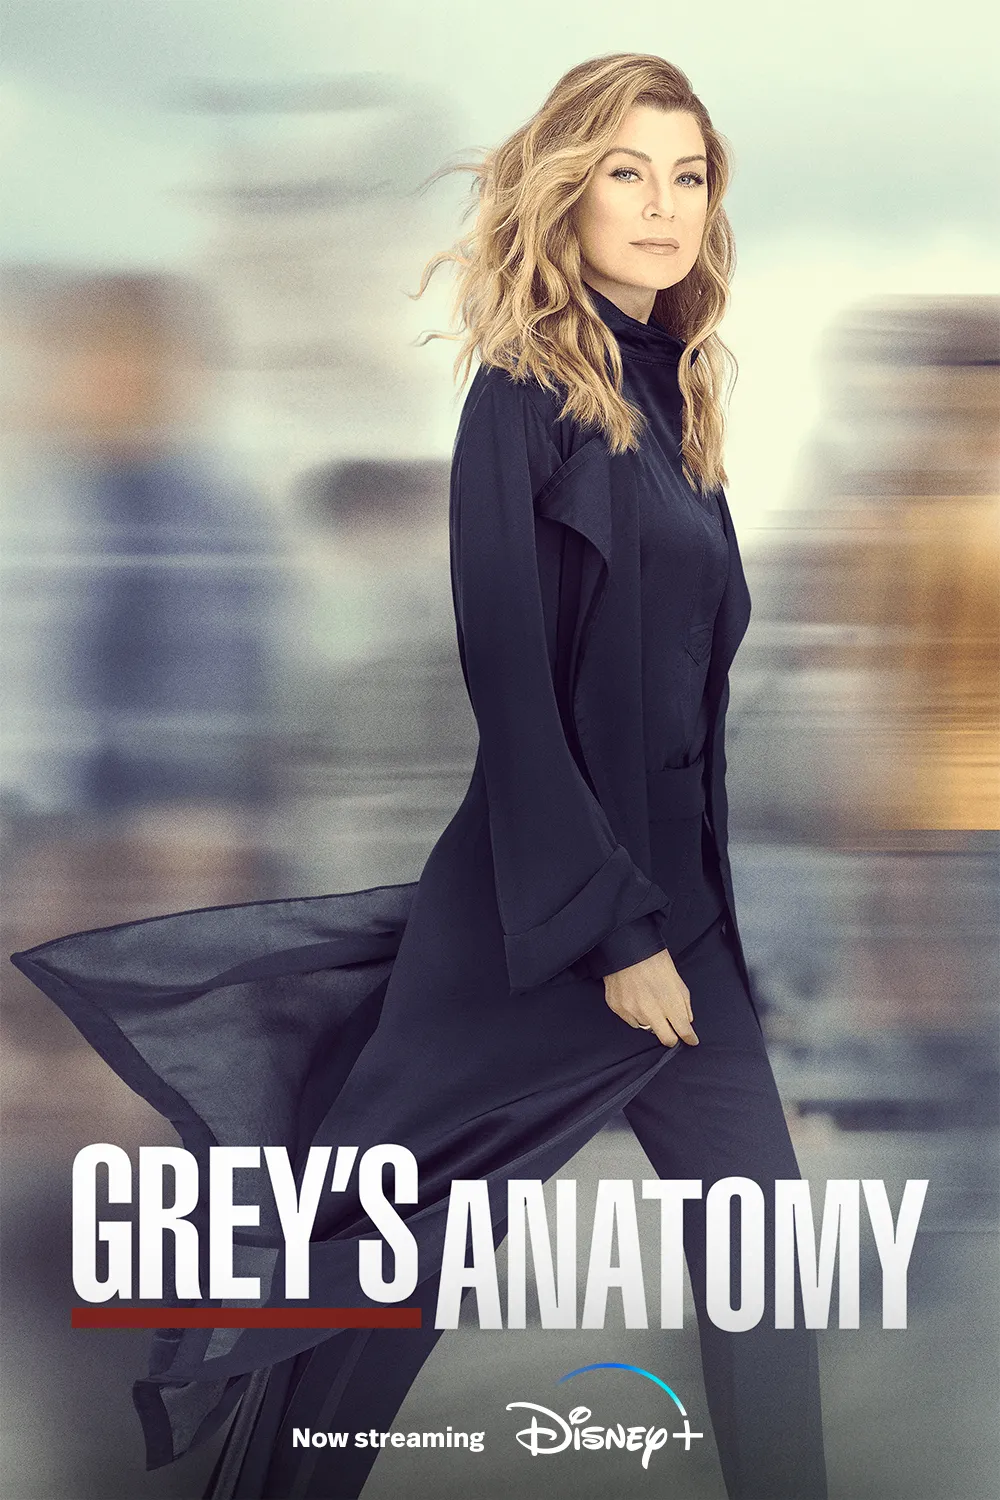 Grey's Anatomy on Disney+ TV show poster: A long-running medical drama that follows the lives of interns, residents, and attendings at Grey Sloan Memorial Hospital.